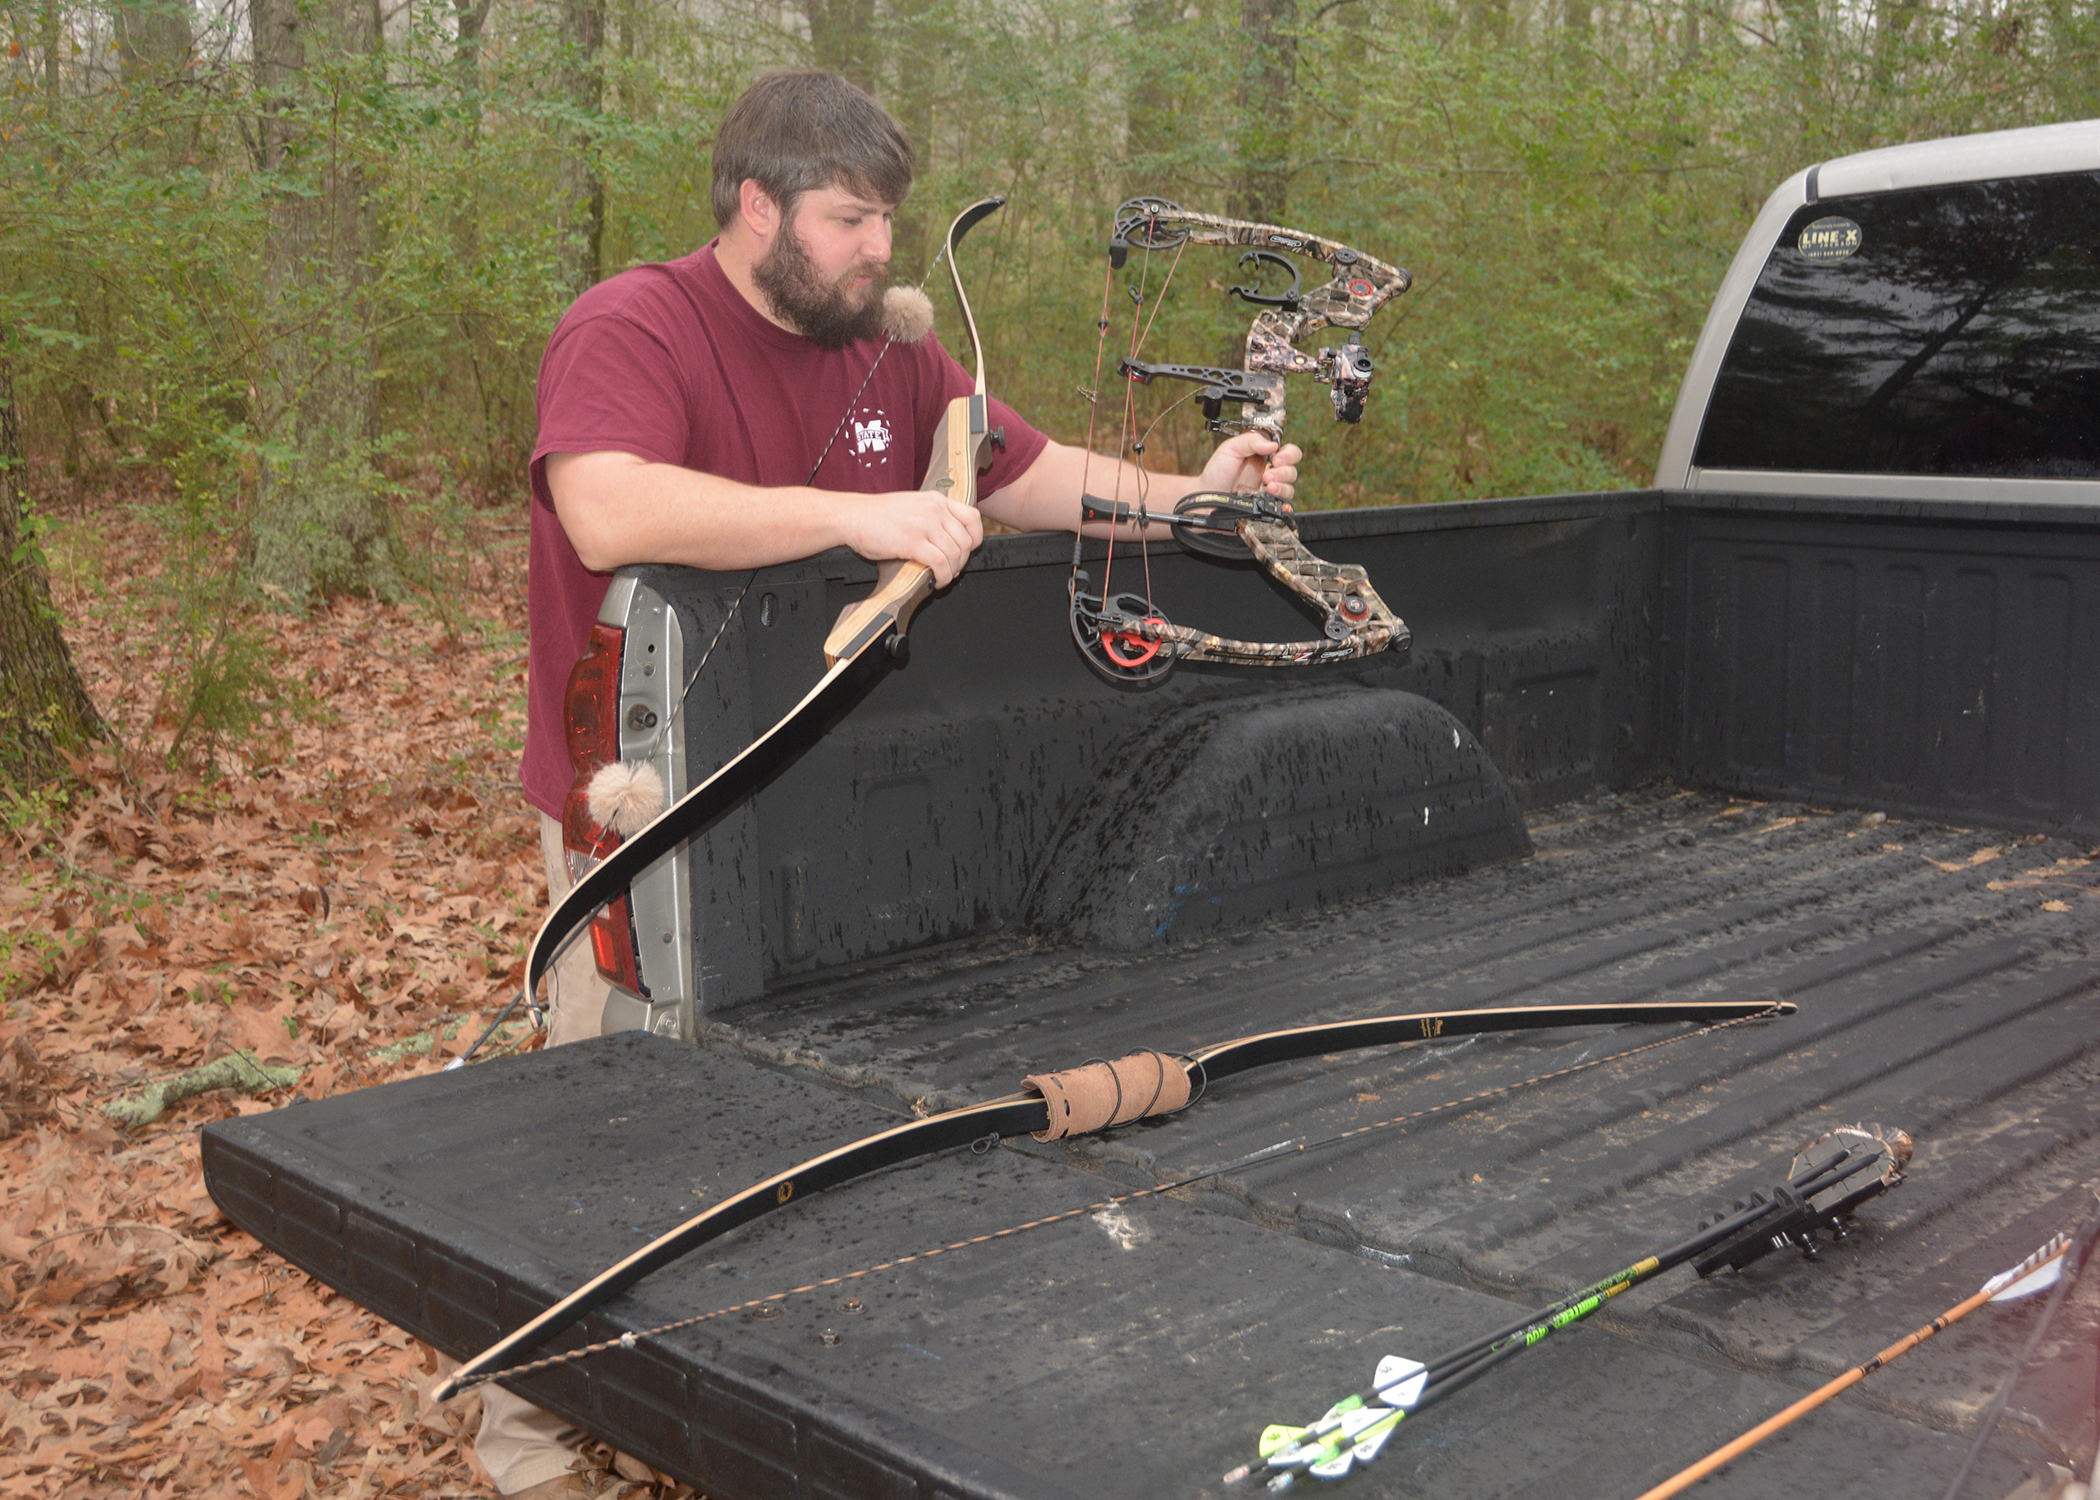 Archery enthusiasts have three types of bows to consider -- compound, recurved and longbow. (Photo by MSU Extension Service/Linda Breazeale)